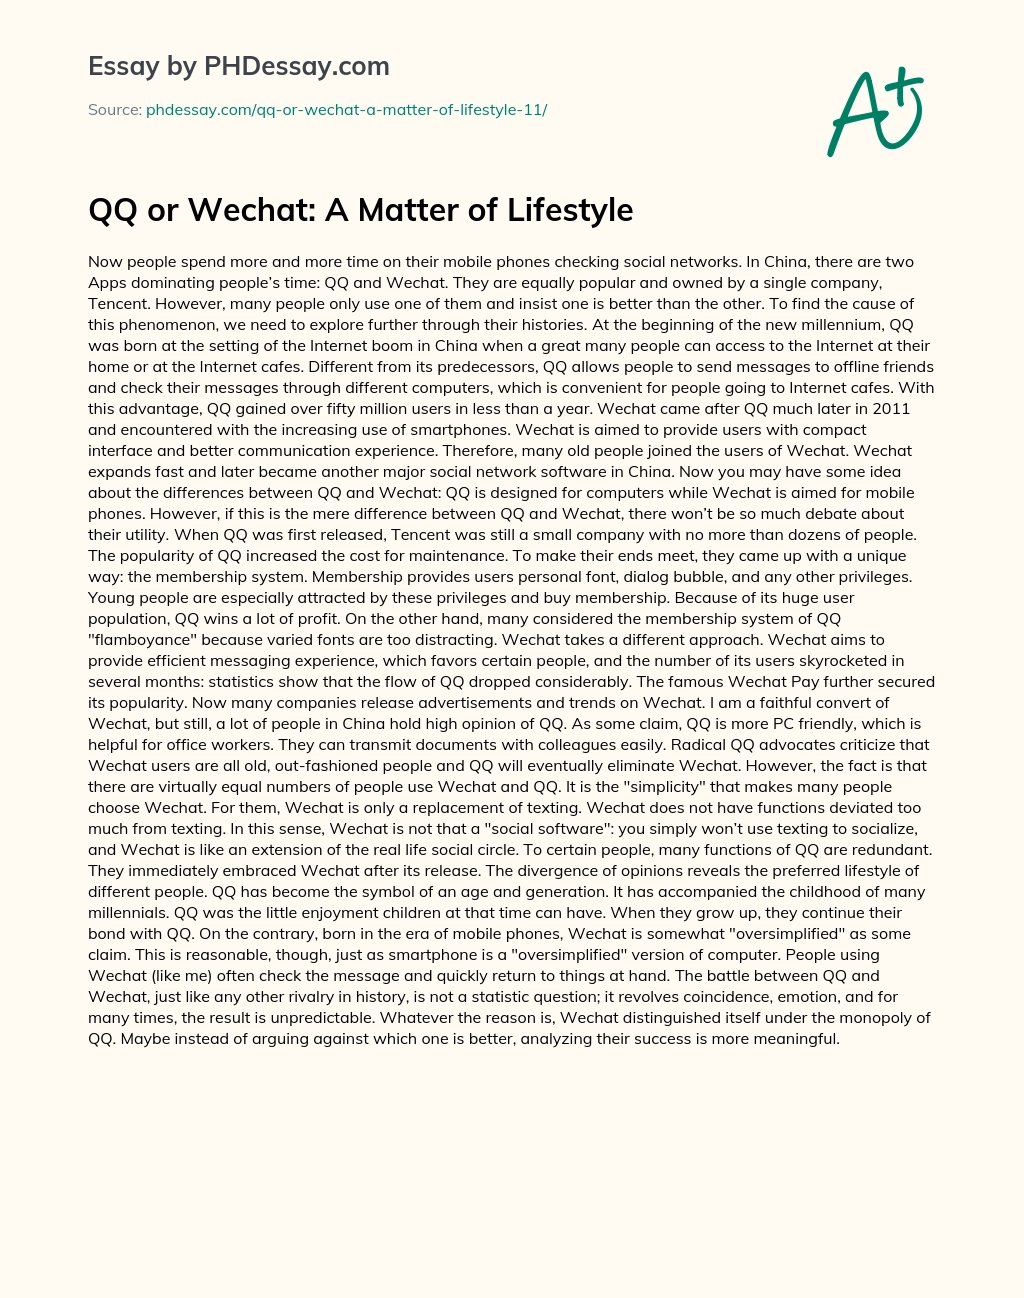 QQ or Wechat: A Matter of Lifestyle essay